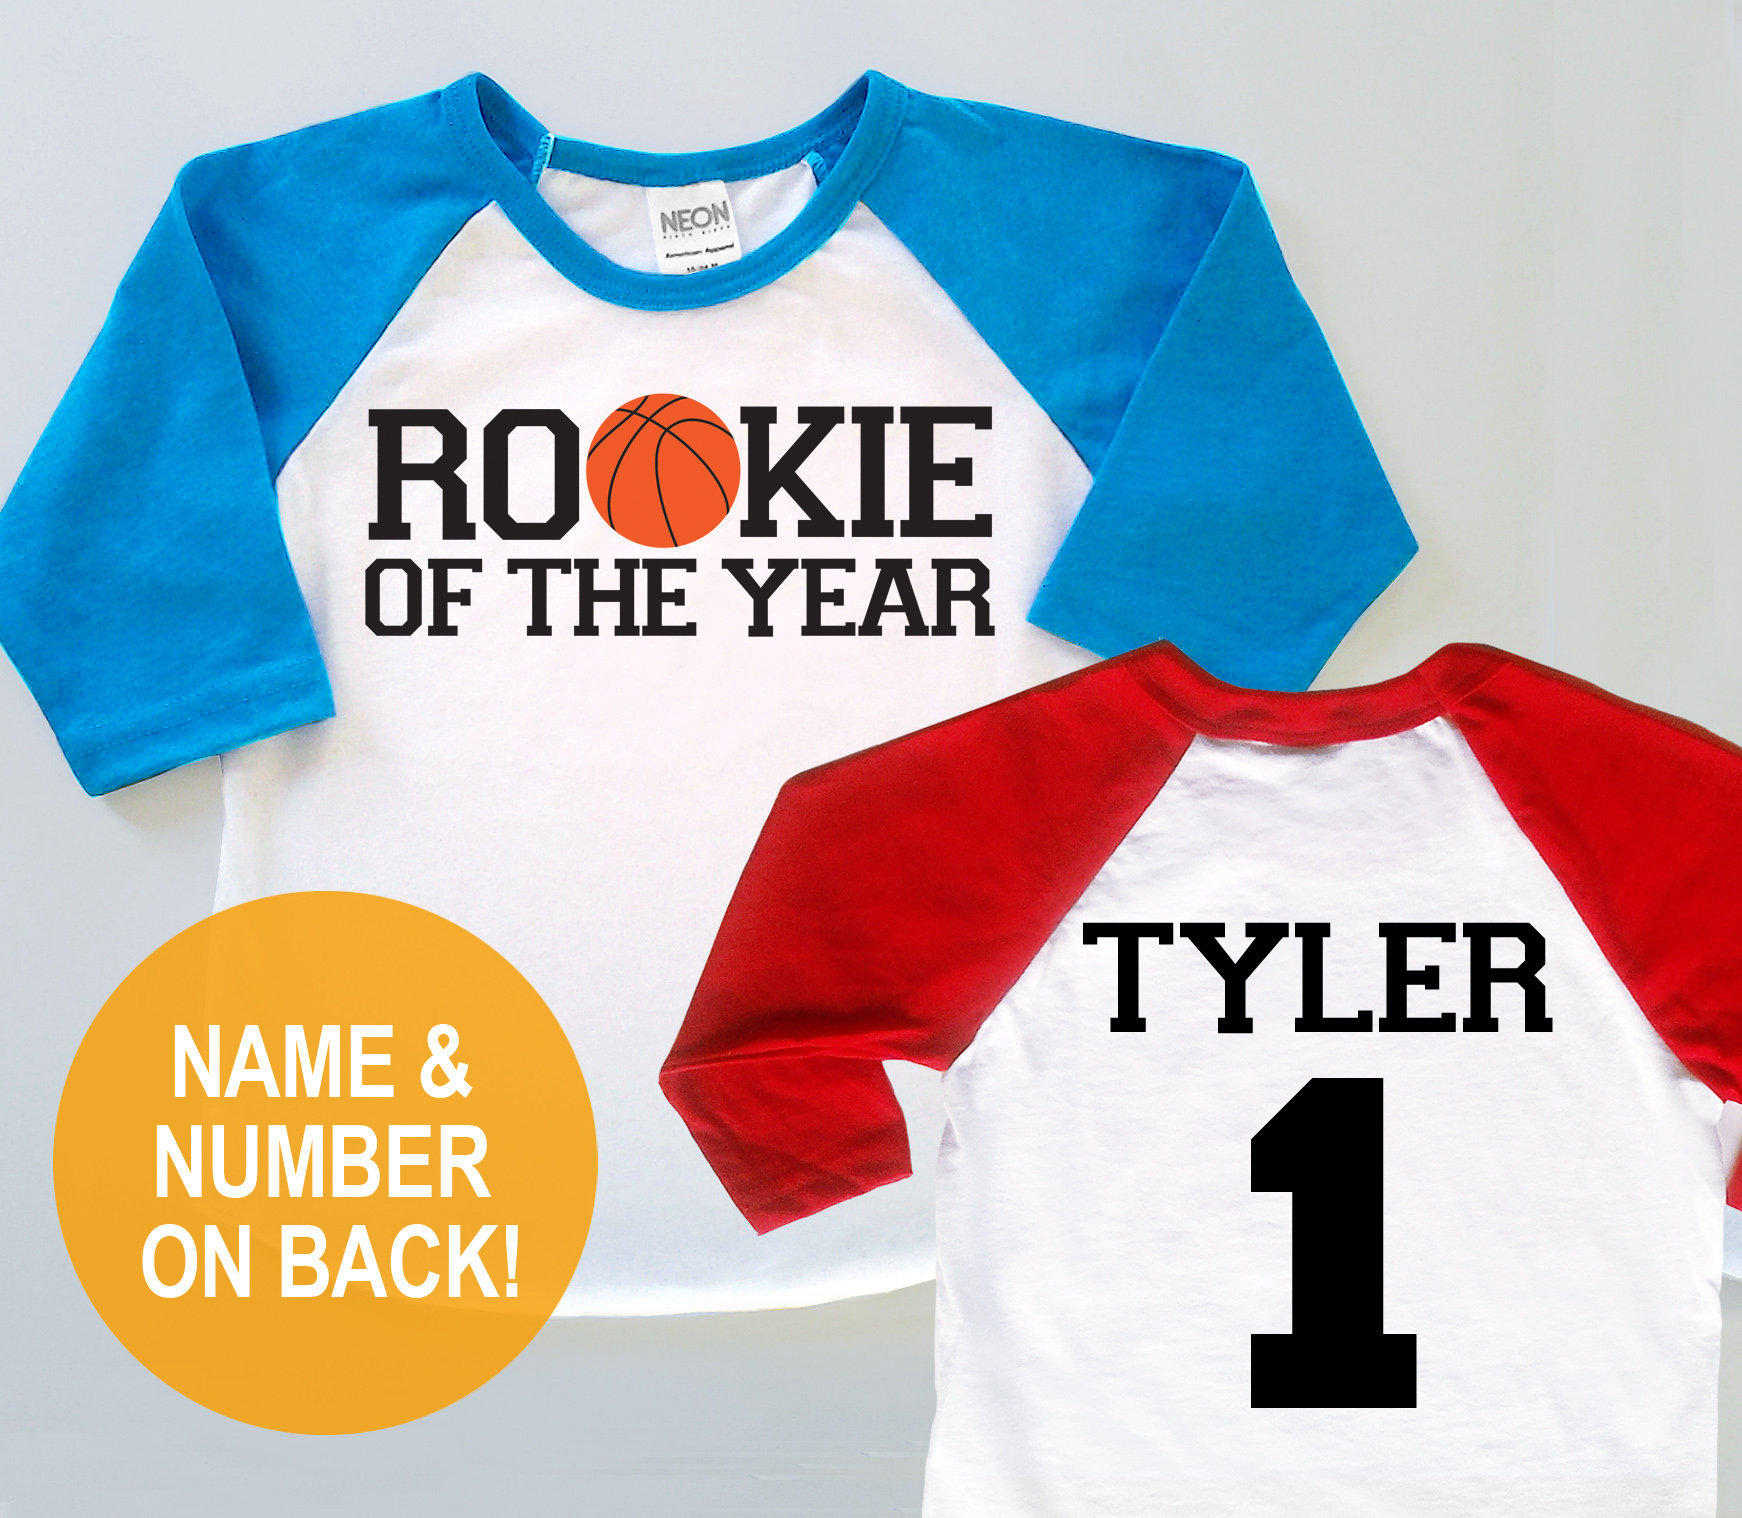 toddler twins jersey